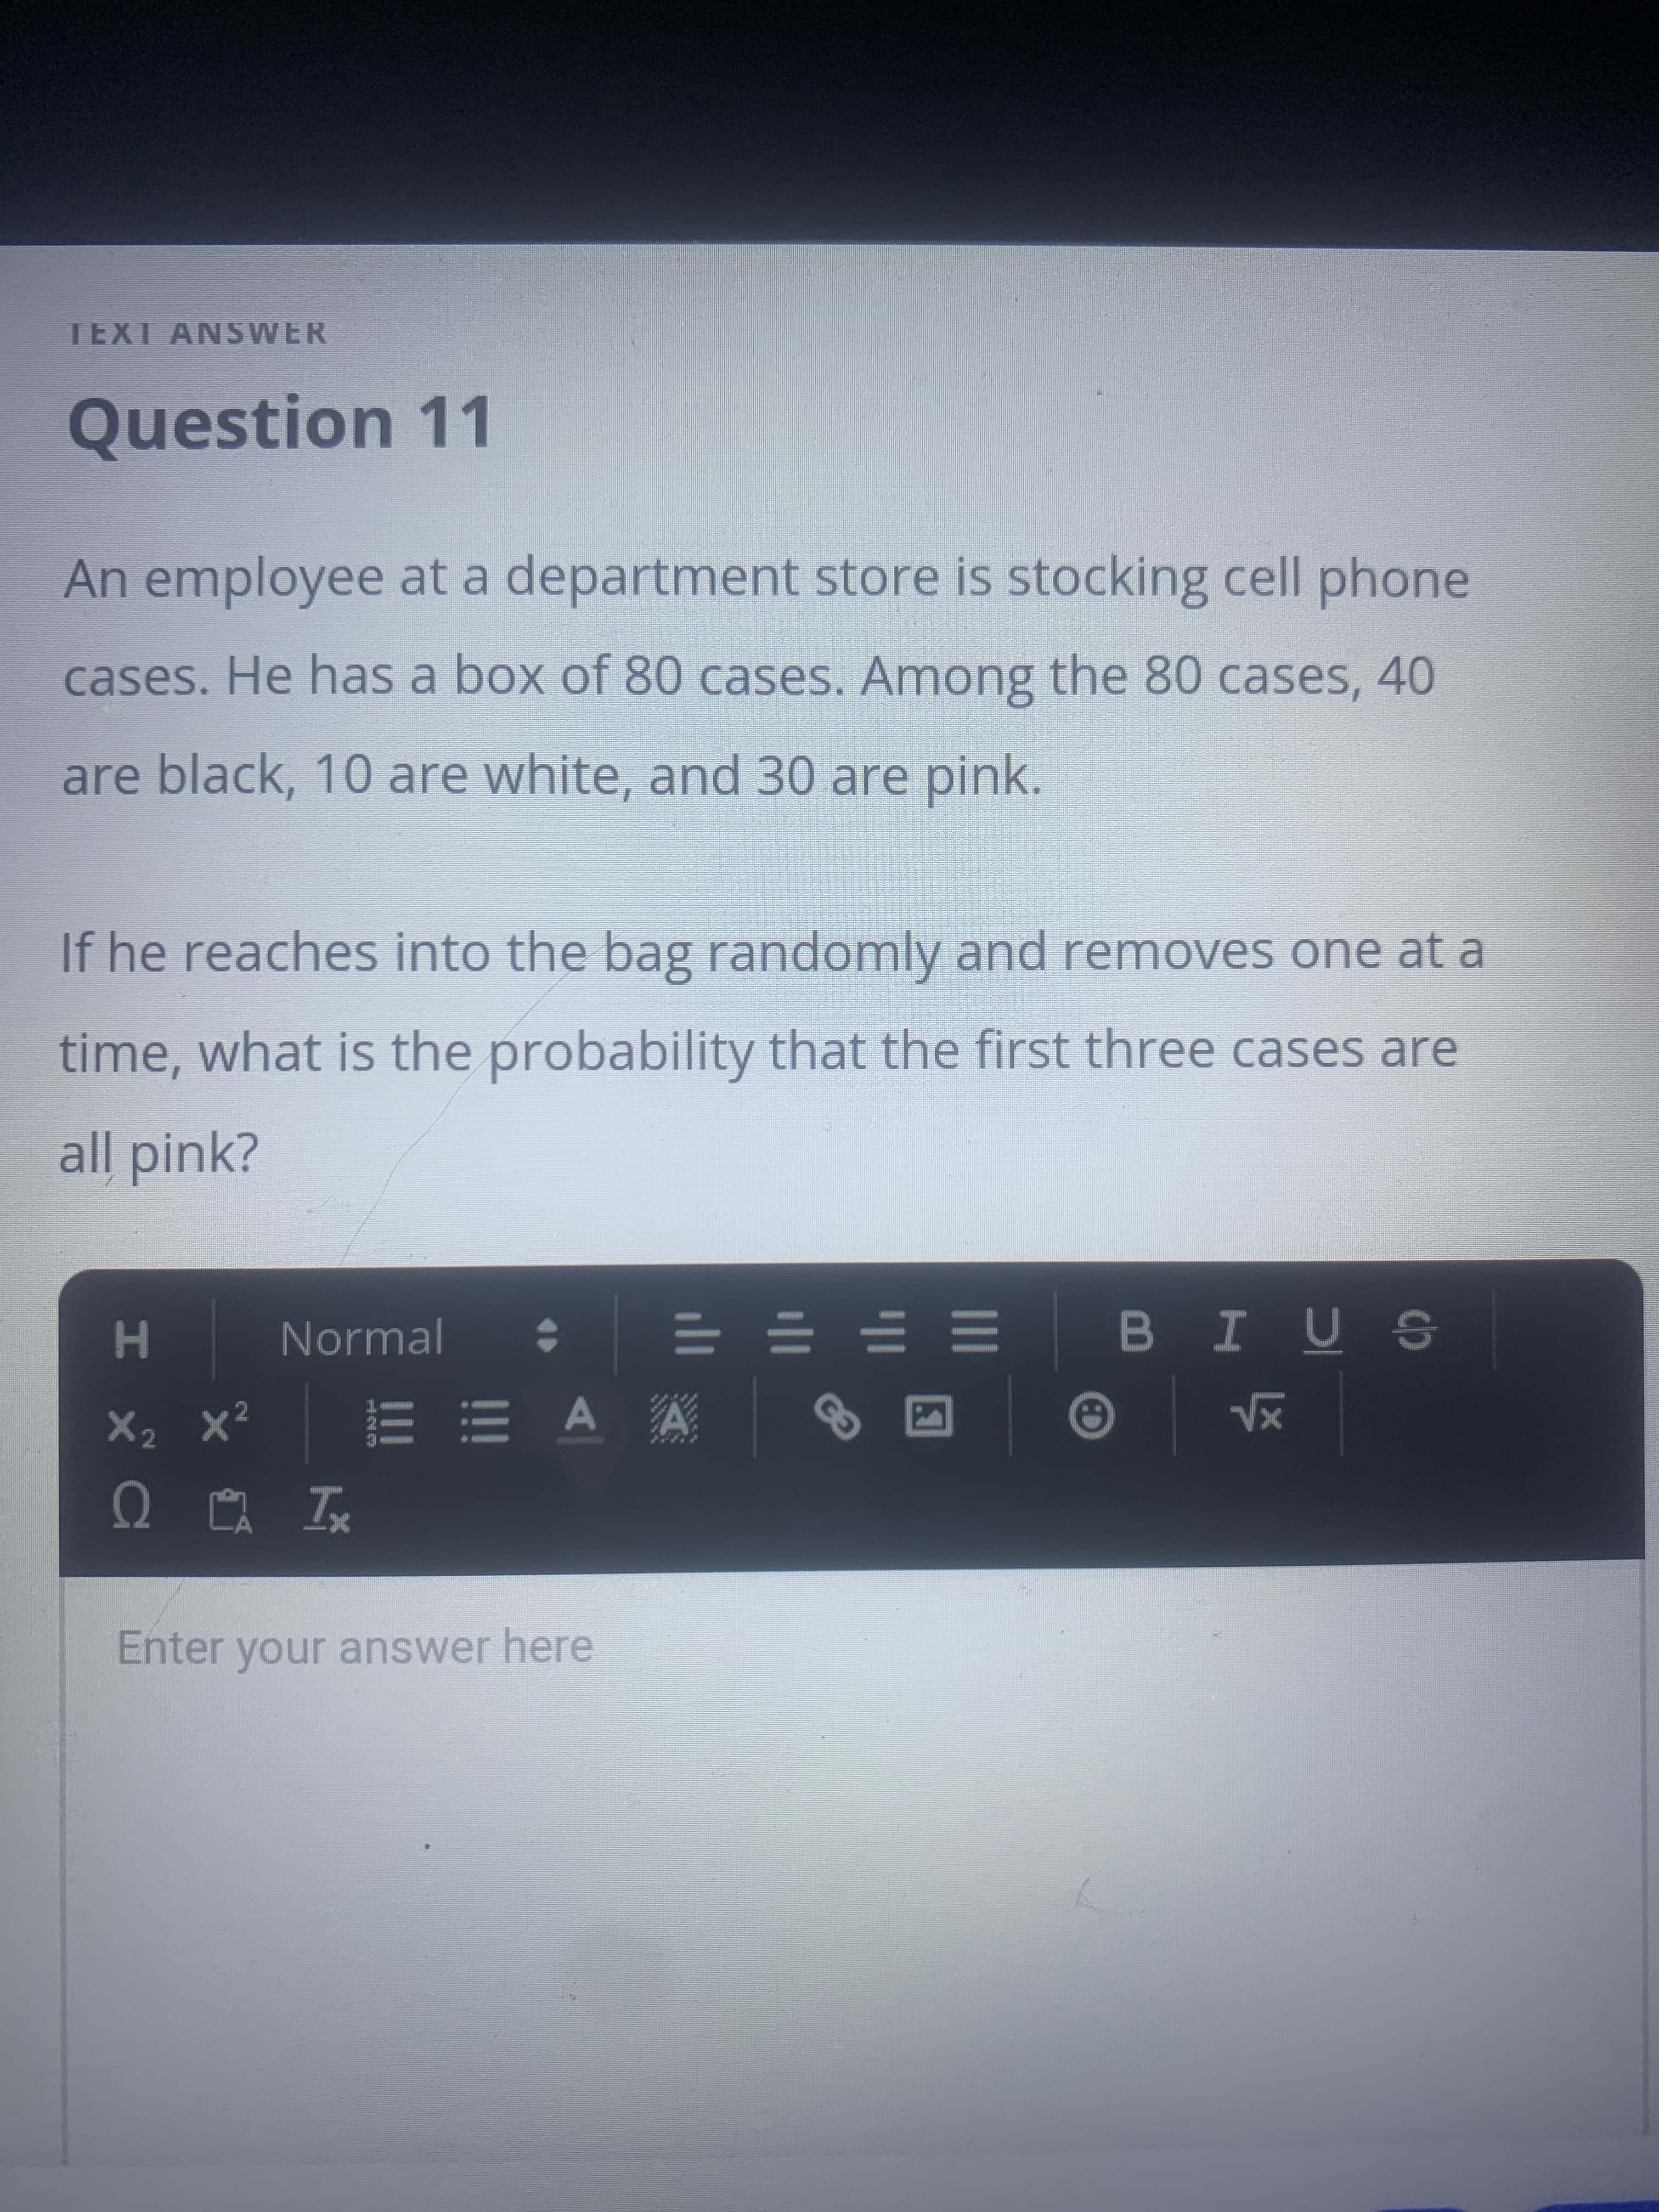 TEXT ANSWER
Question 11
An employee at a department store is stocking cell phone
cases. He has a box of 80 cases. Among the 80 cases, 40
are black, 10 are white, and 30 are pink.
If he reaches into the bag randomly and removes one at a
time, what is the probability that the first three cases are
all pink?
Normal
H
= = = =
E E A A
s ñ I 8
X2 x²
Enter your answer here
